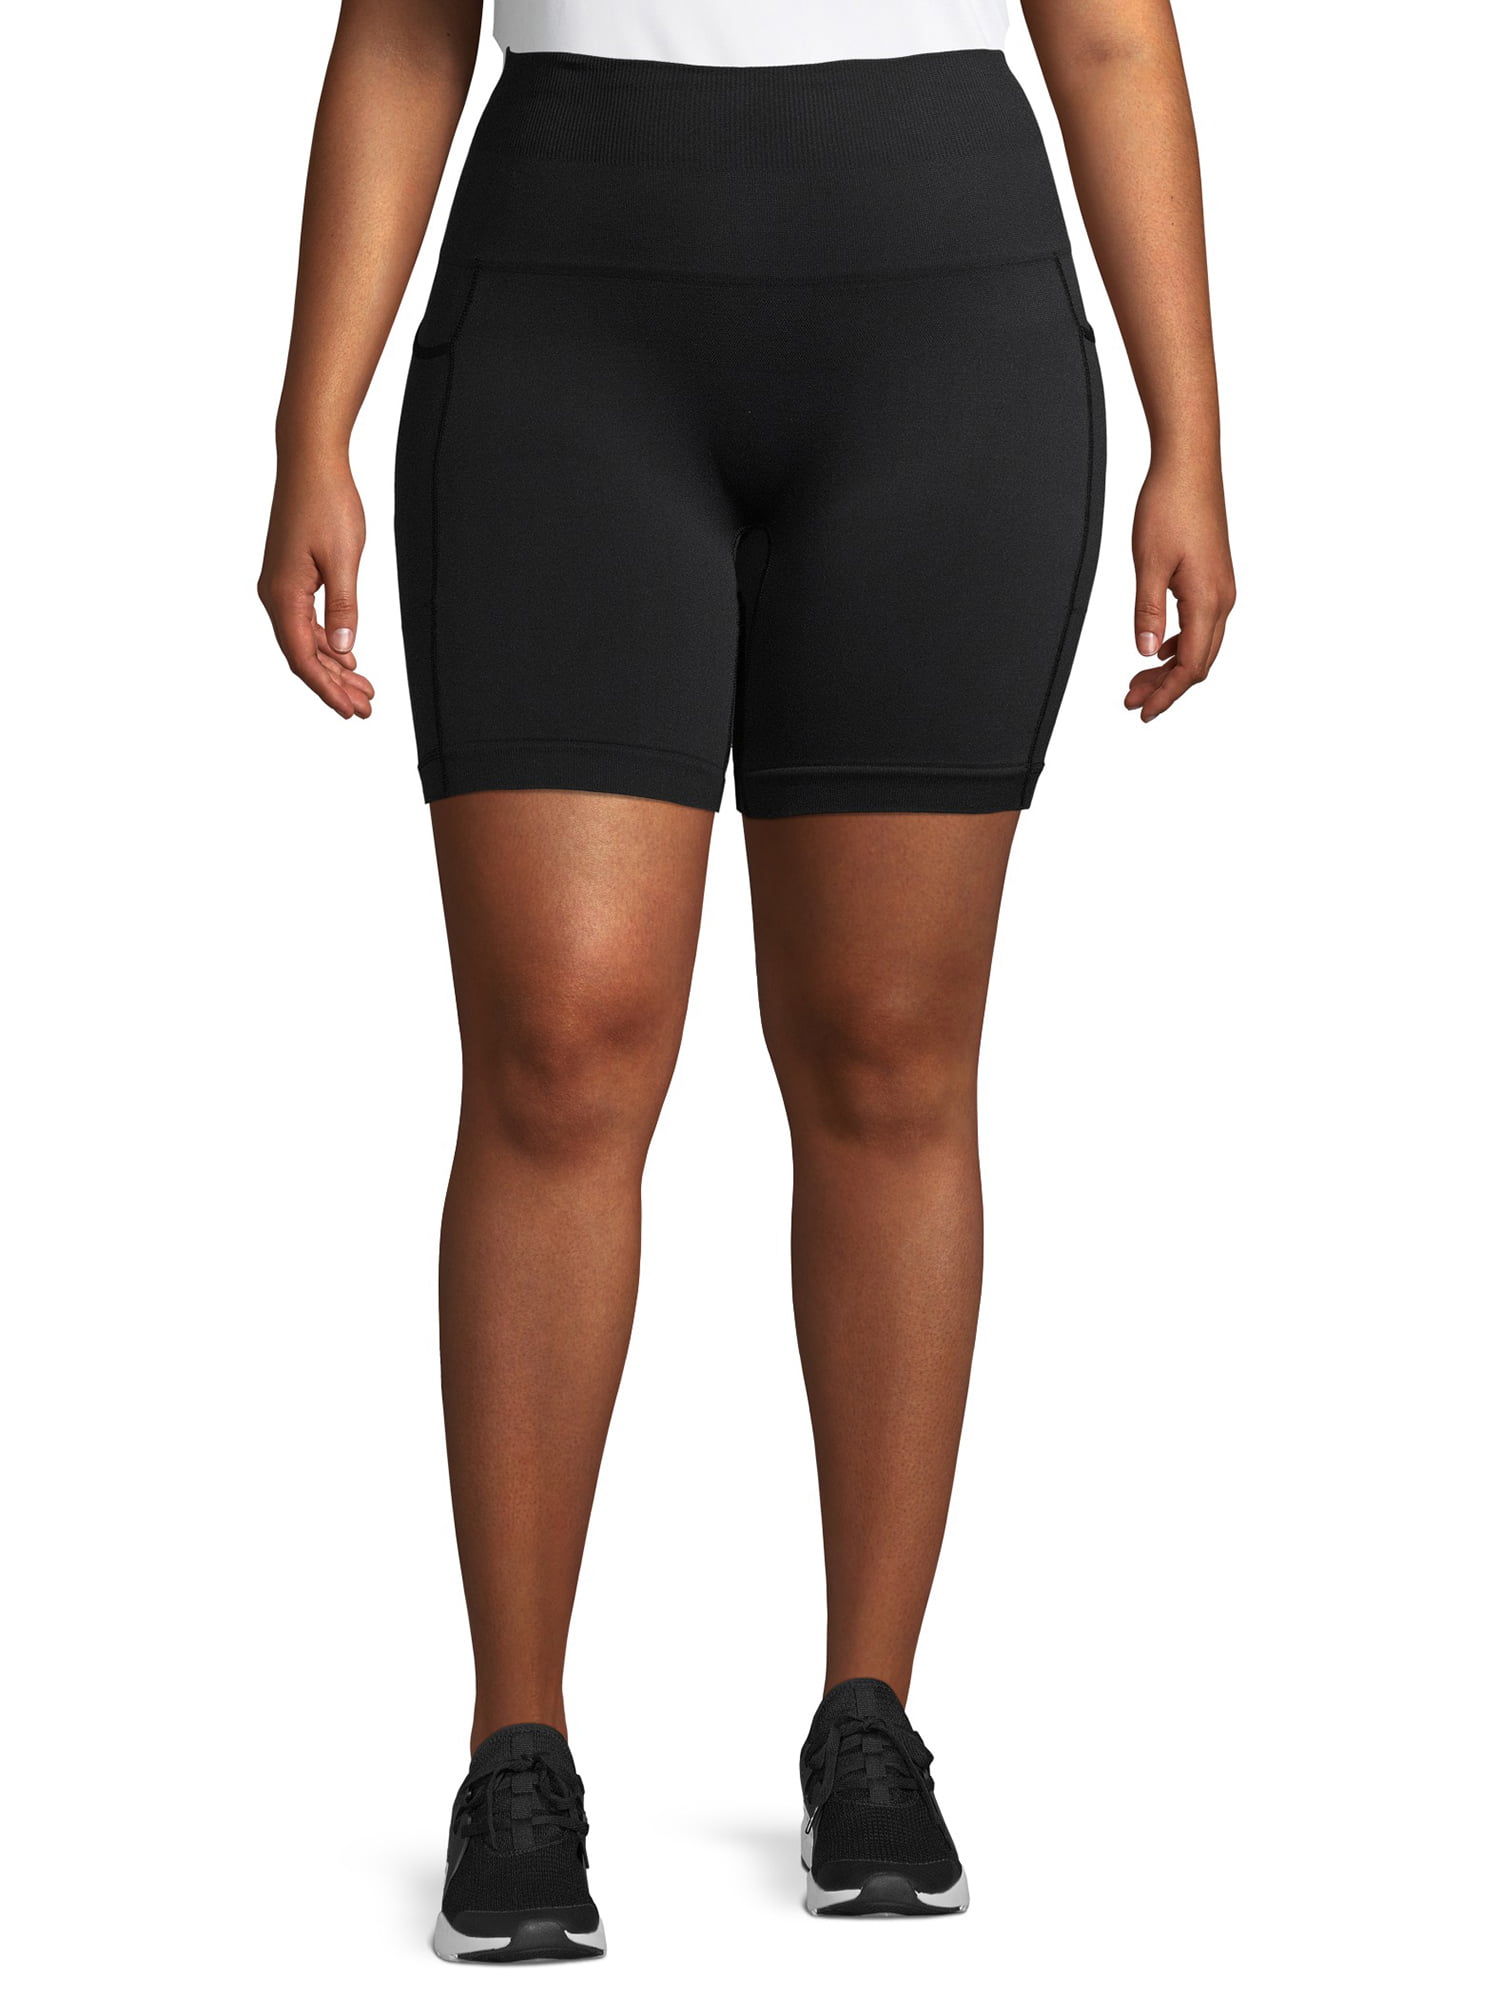 Women's Plus Size Active Seamless Bicycle Short with Phone Pocket ...